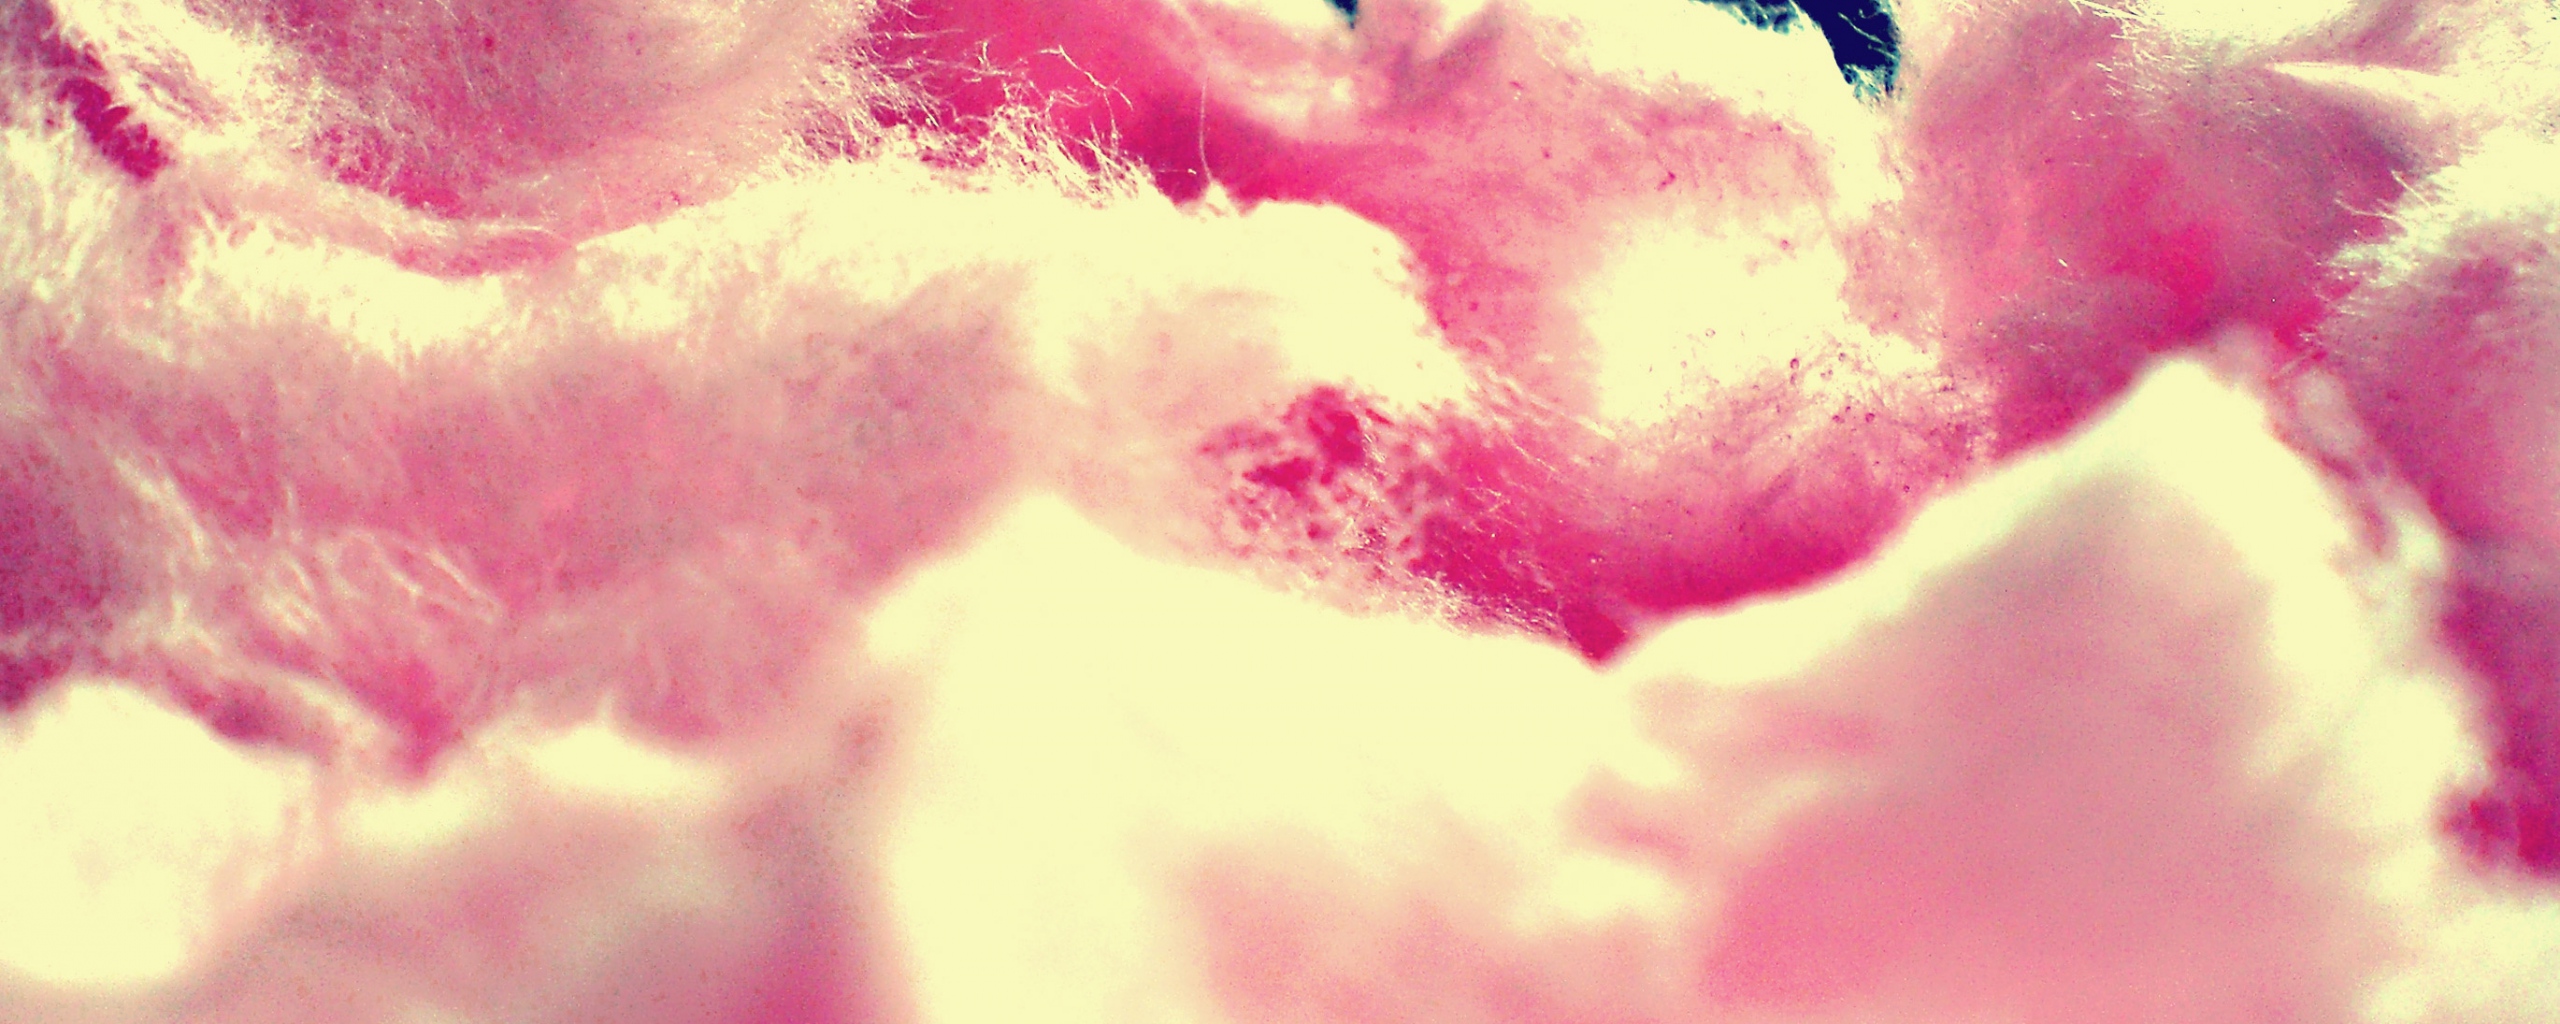 Food Cotton Candy 2560x1024